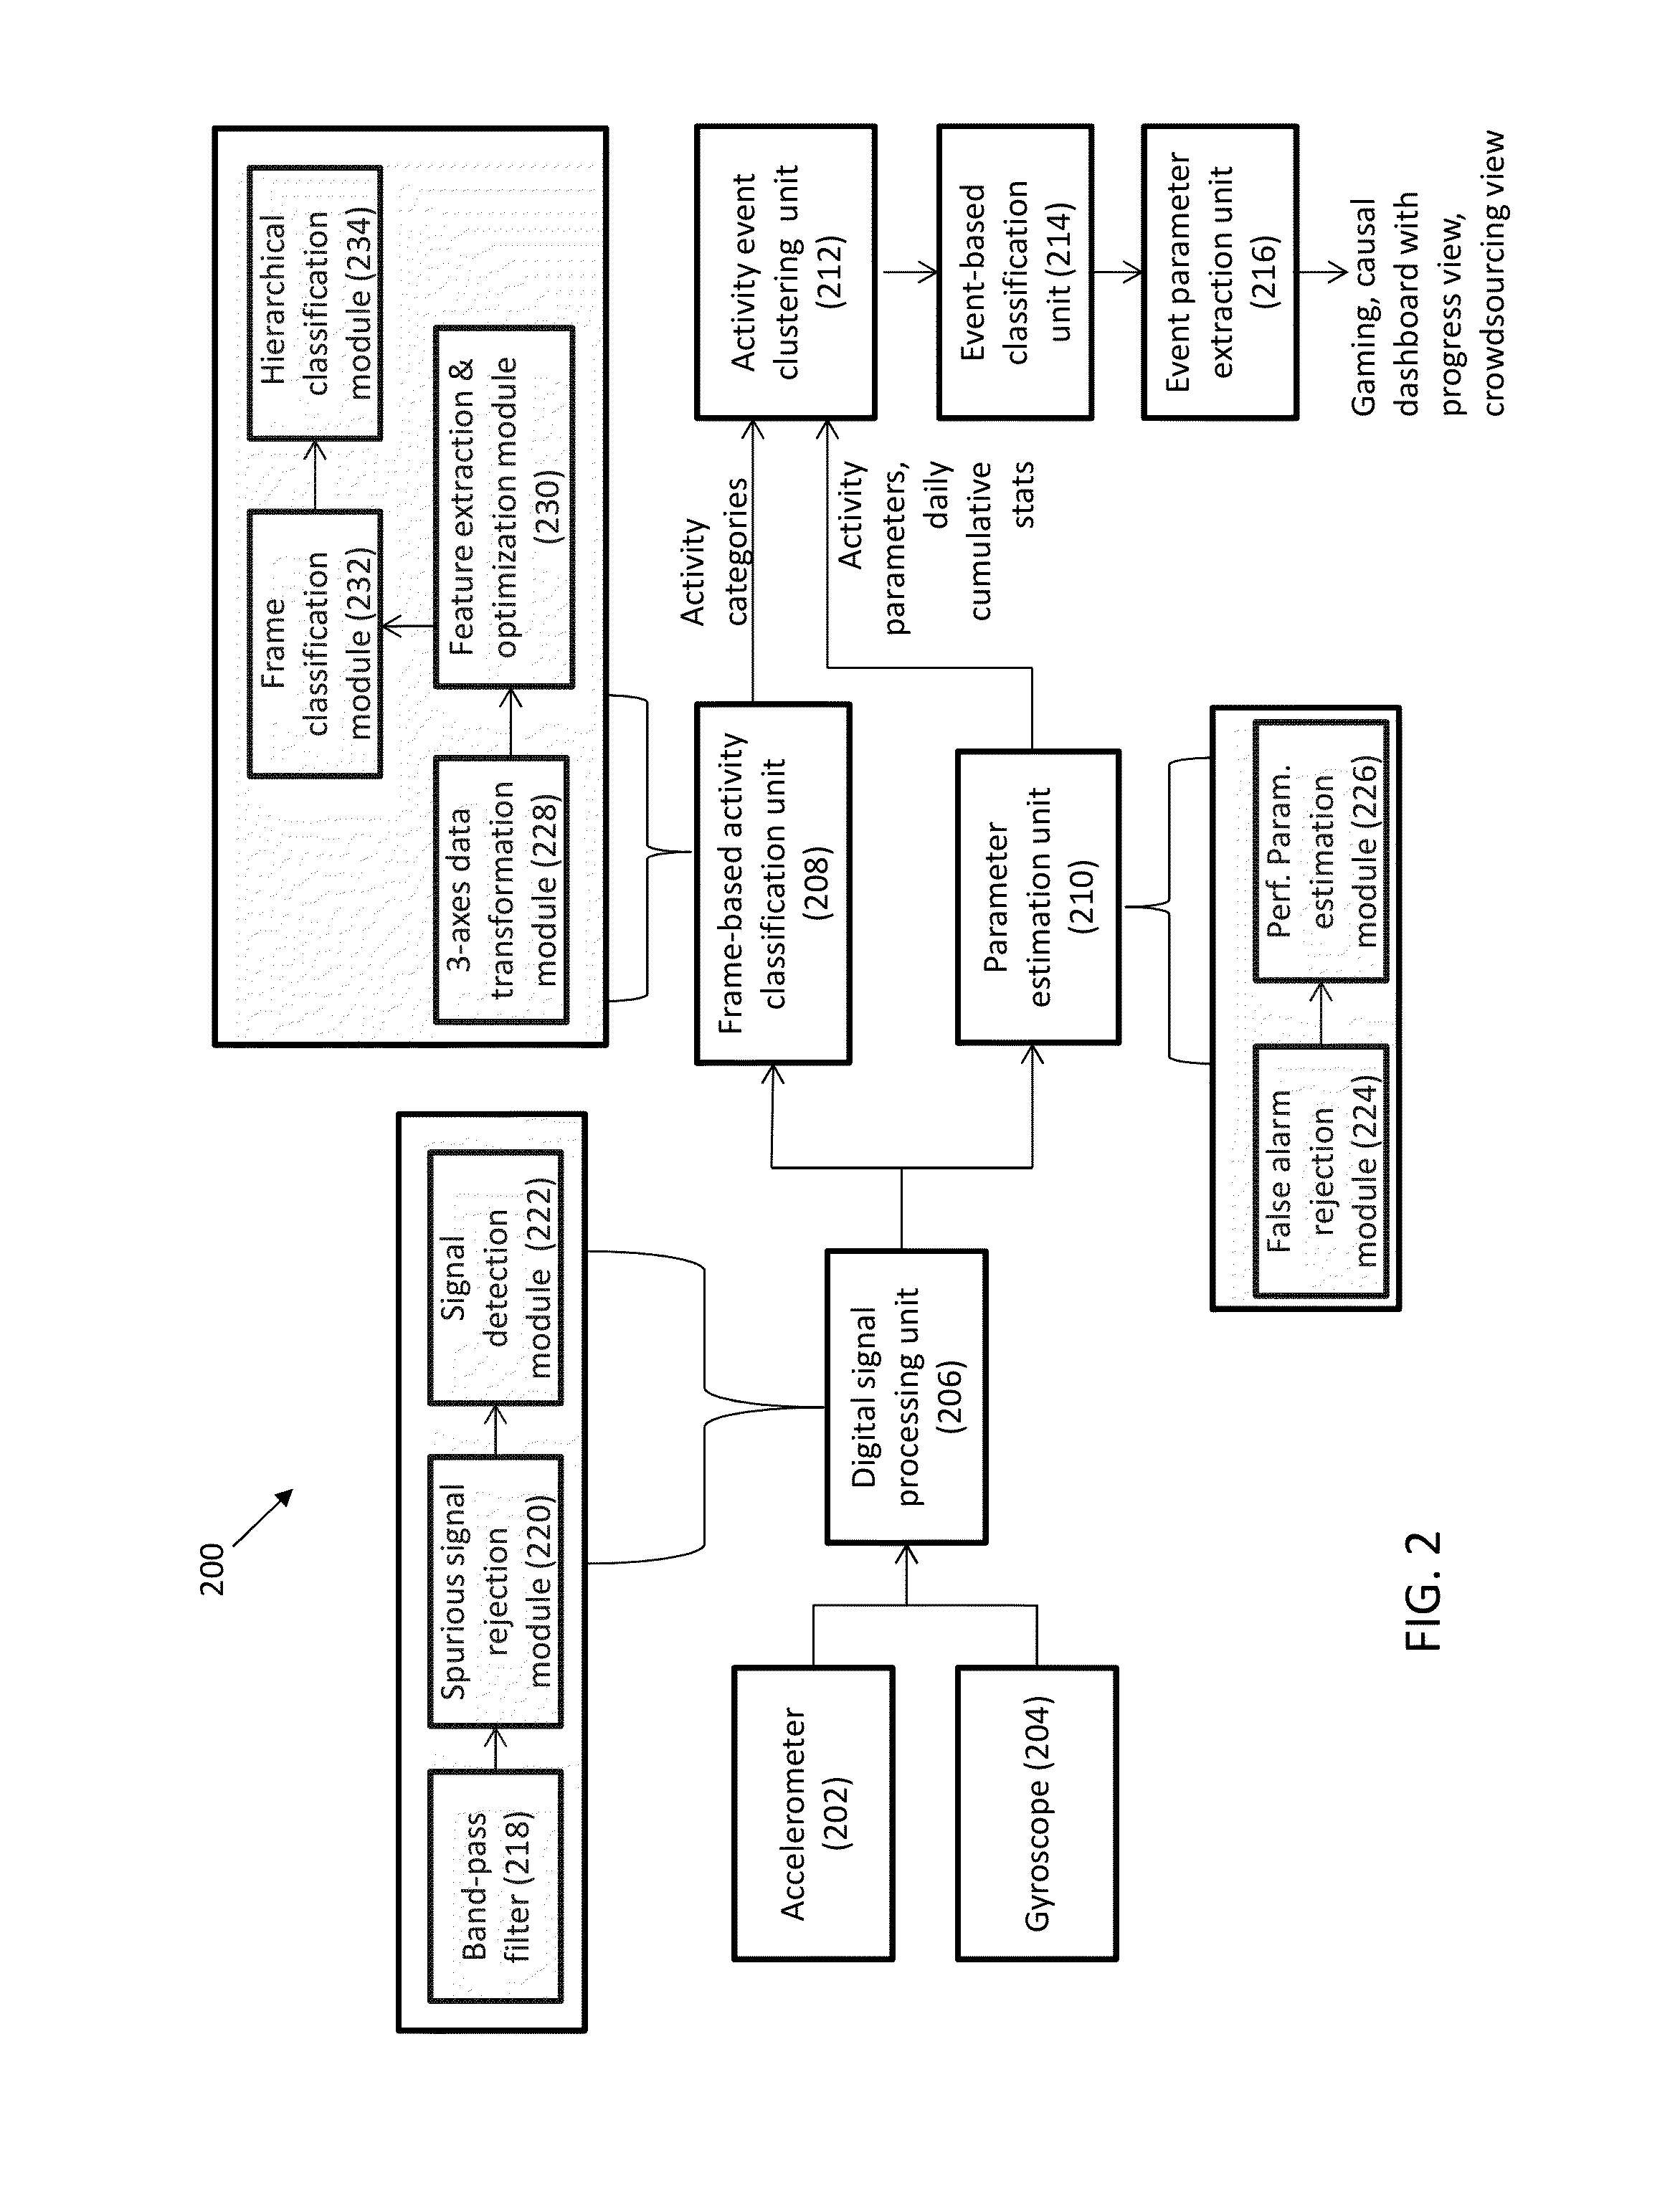 System and method for processing motion-related sensor data with social mind-body games for health application